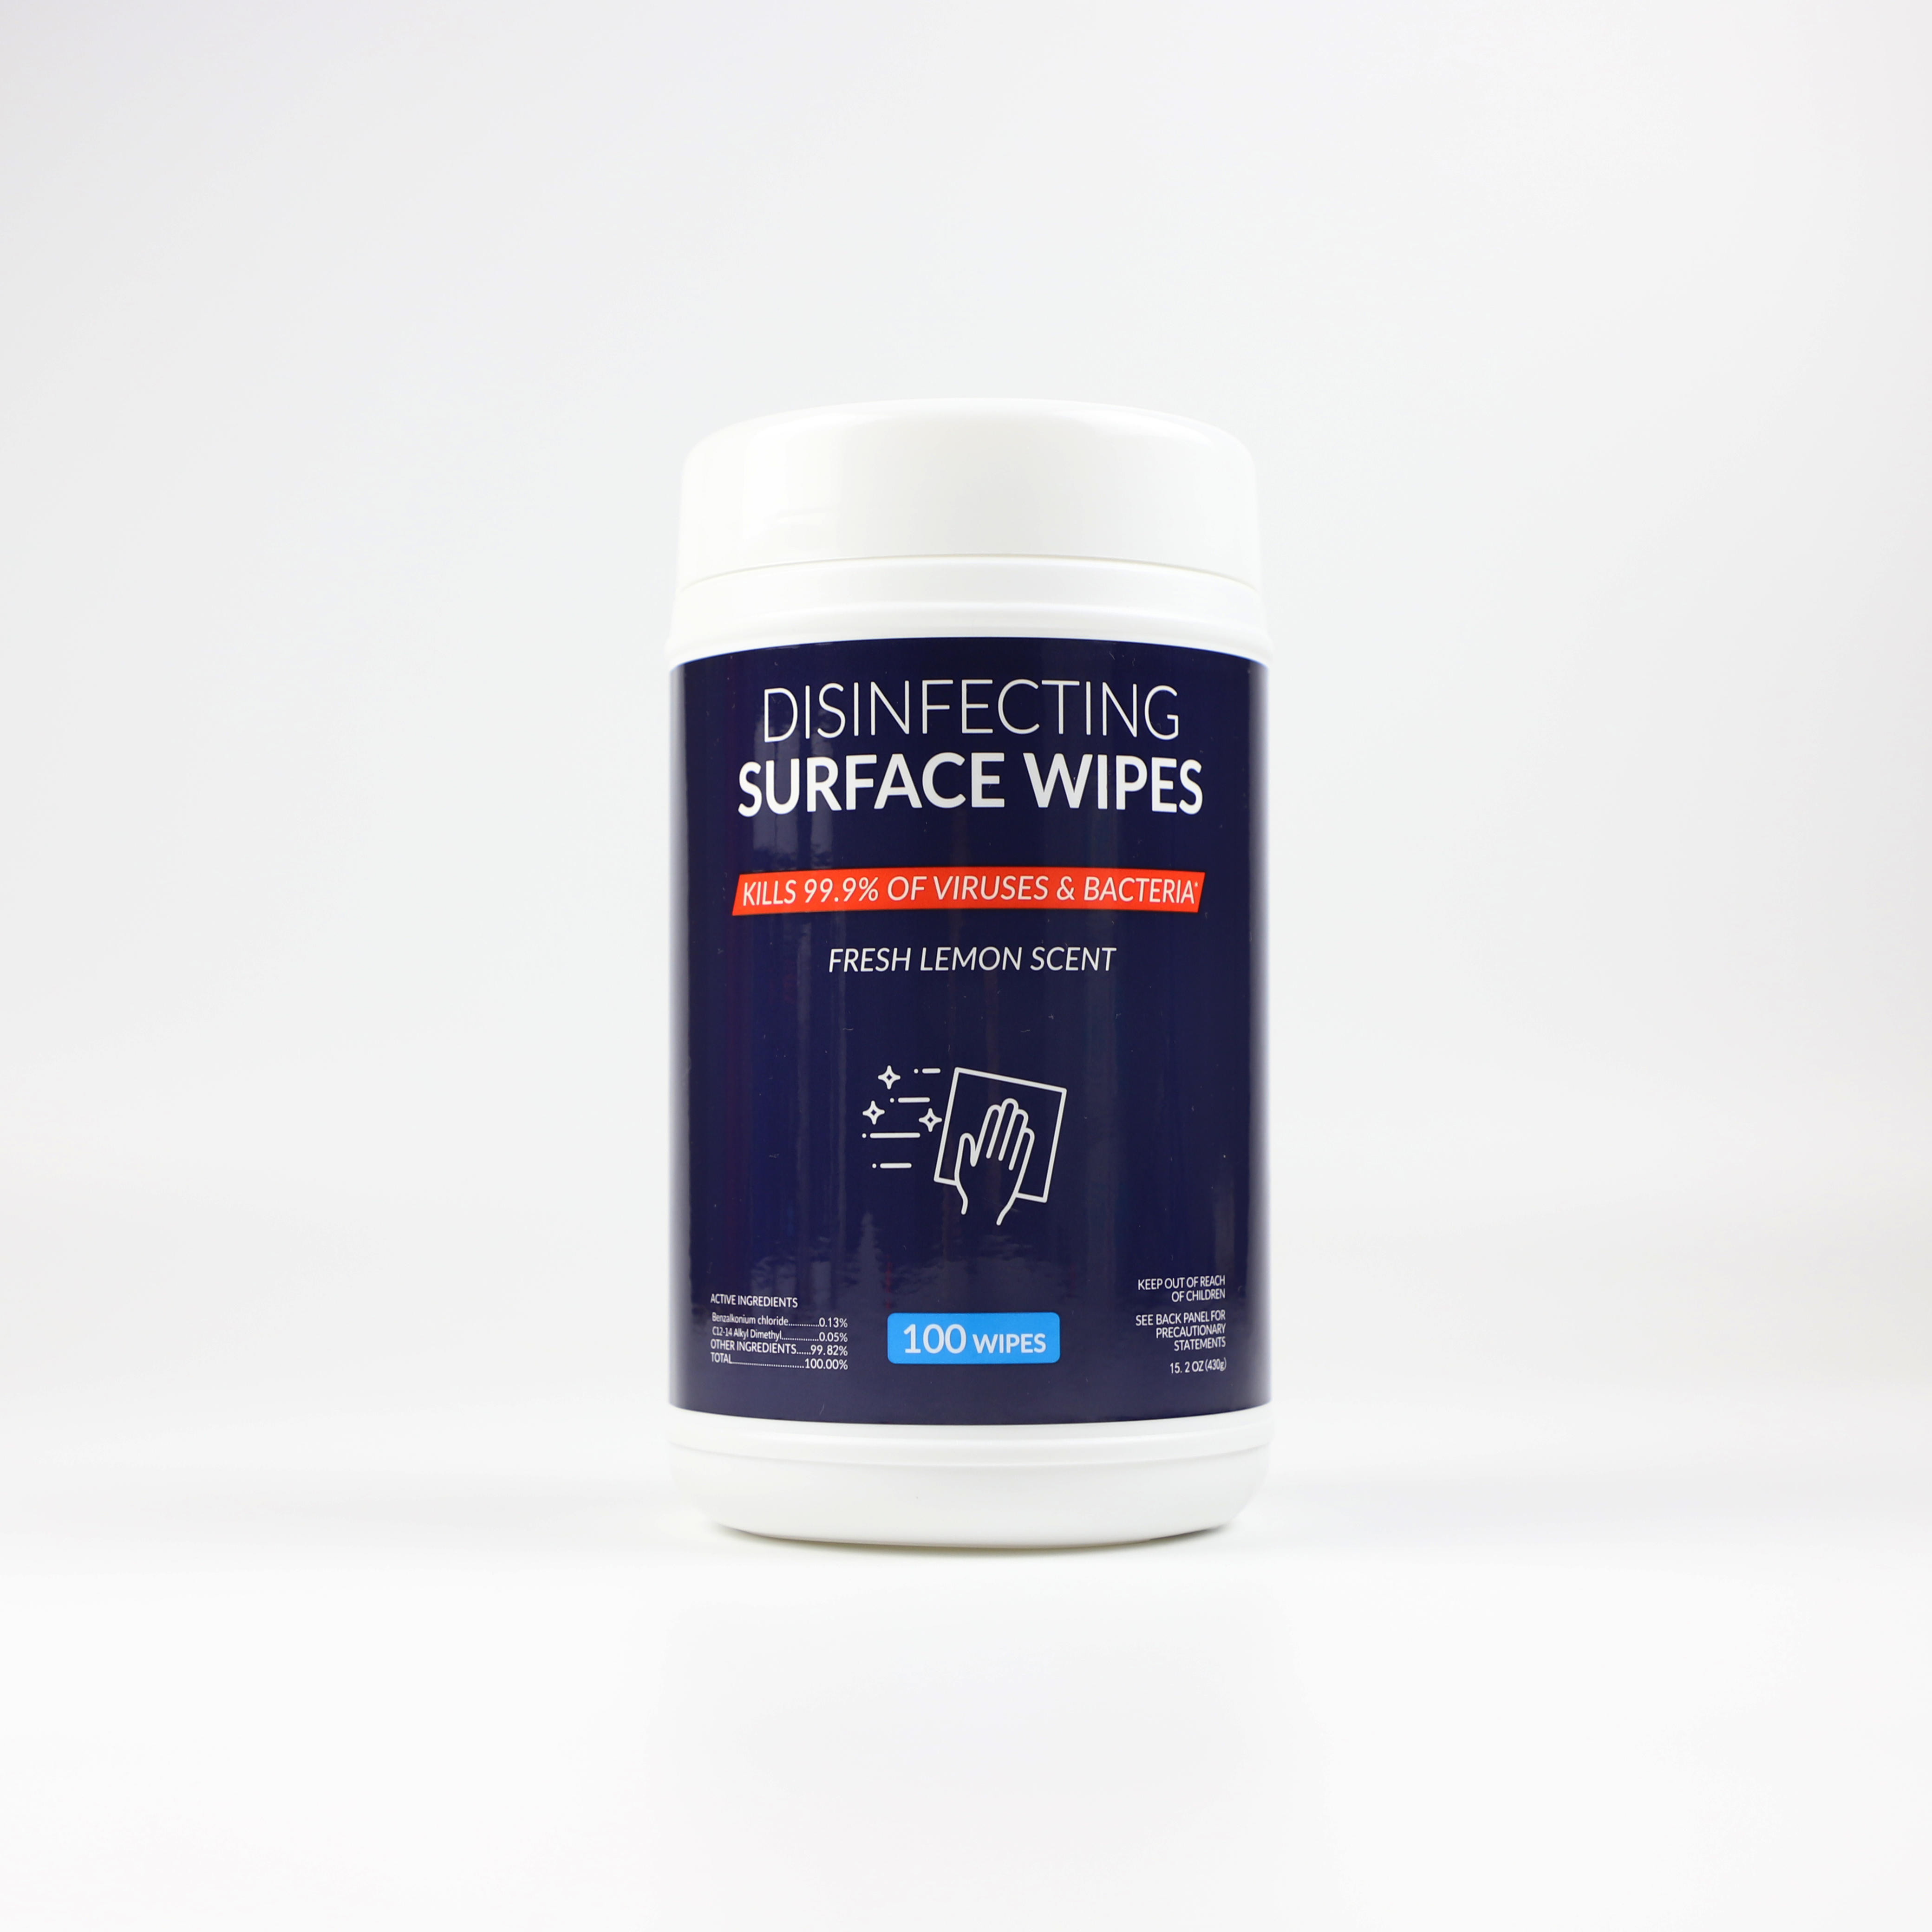 Disinfectant Wipes Manufacturer Multi-Surface Antibacterial Cleaning Wipes 